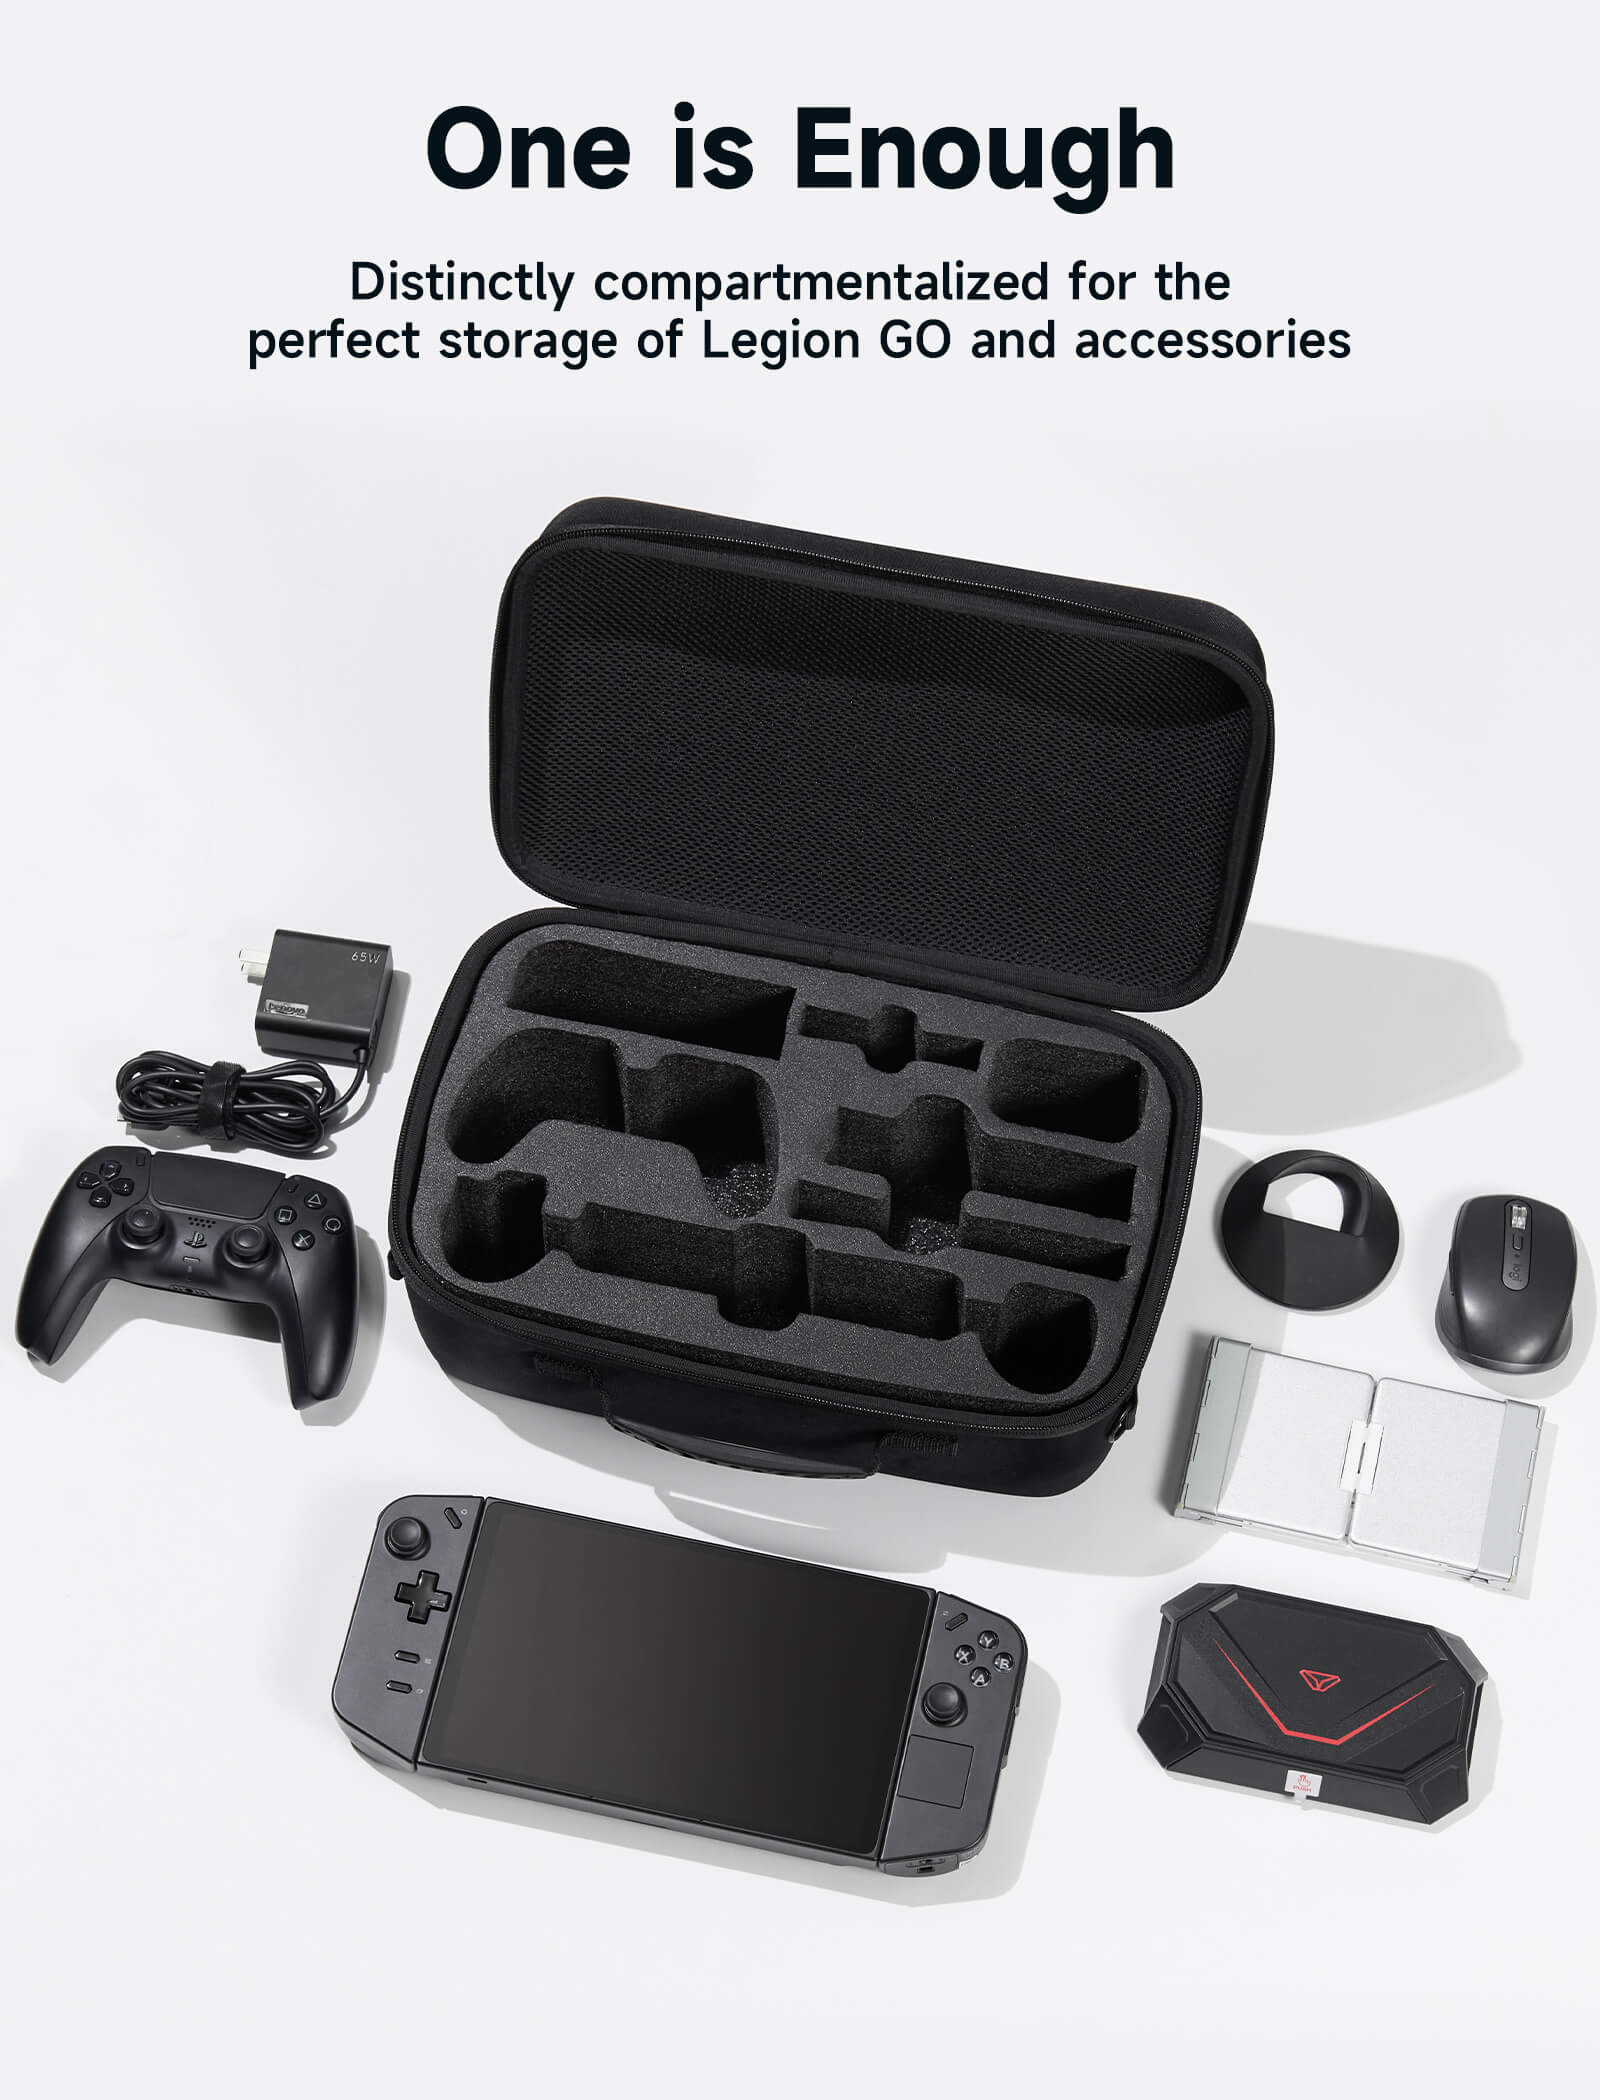 Carrying Case for Legion Go